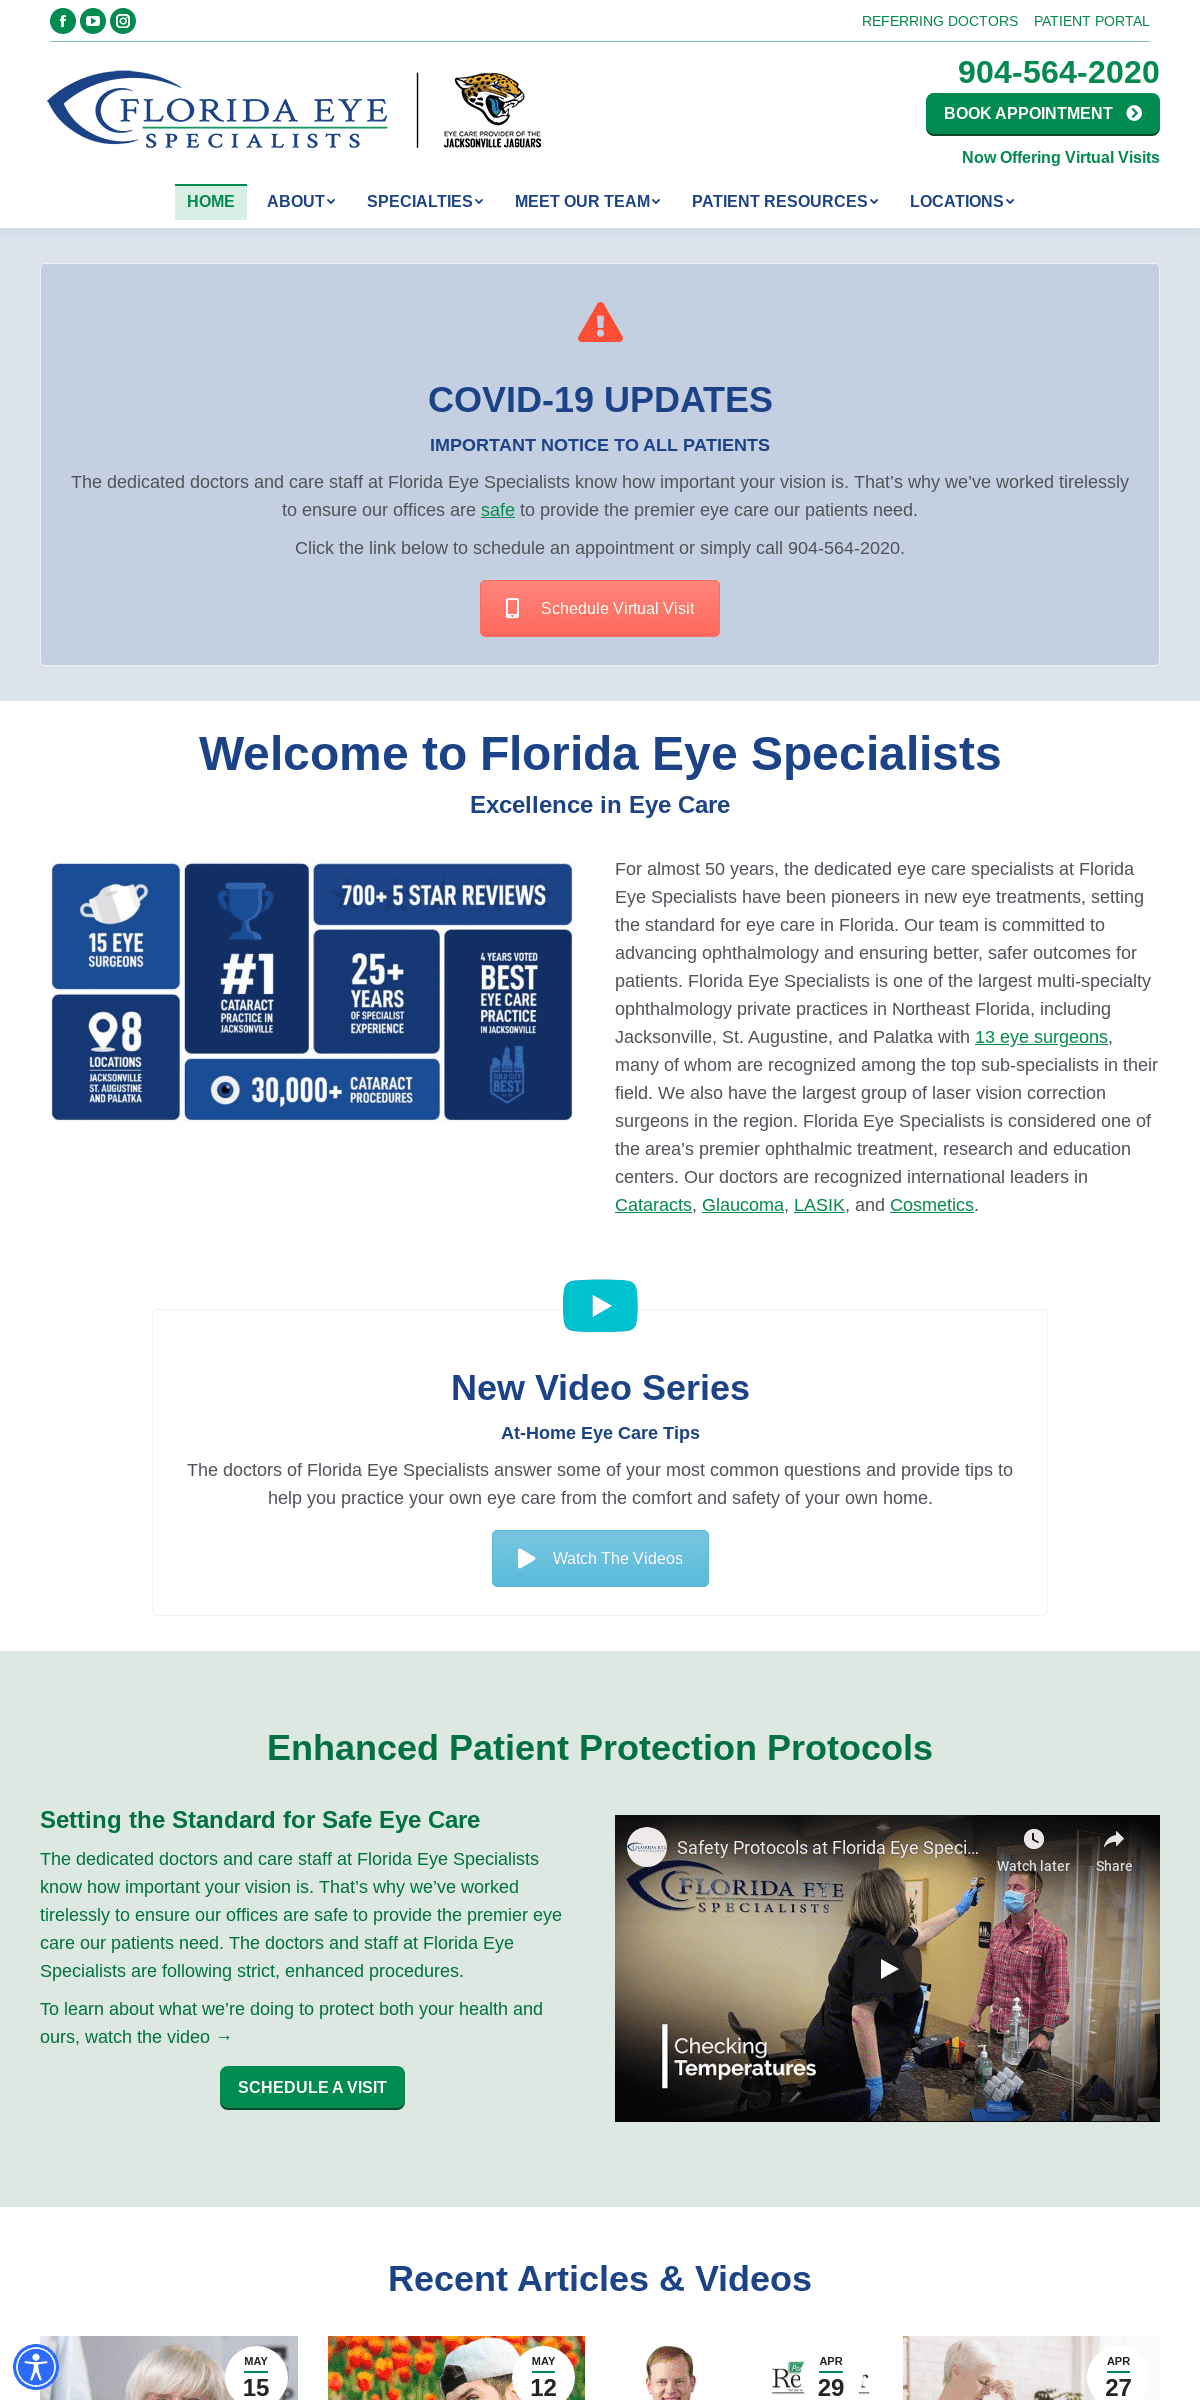 A complete backup of floridaeyespecialists.com